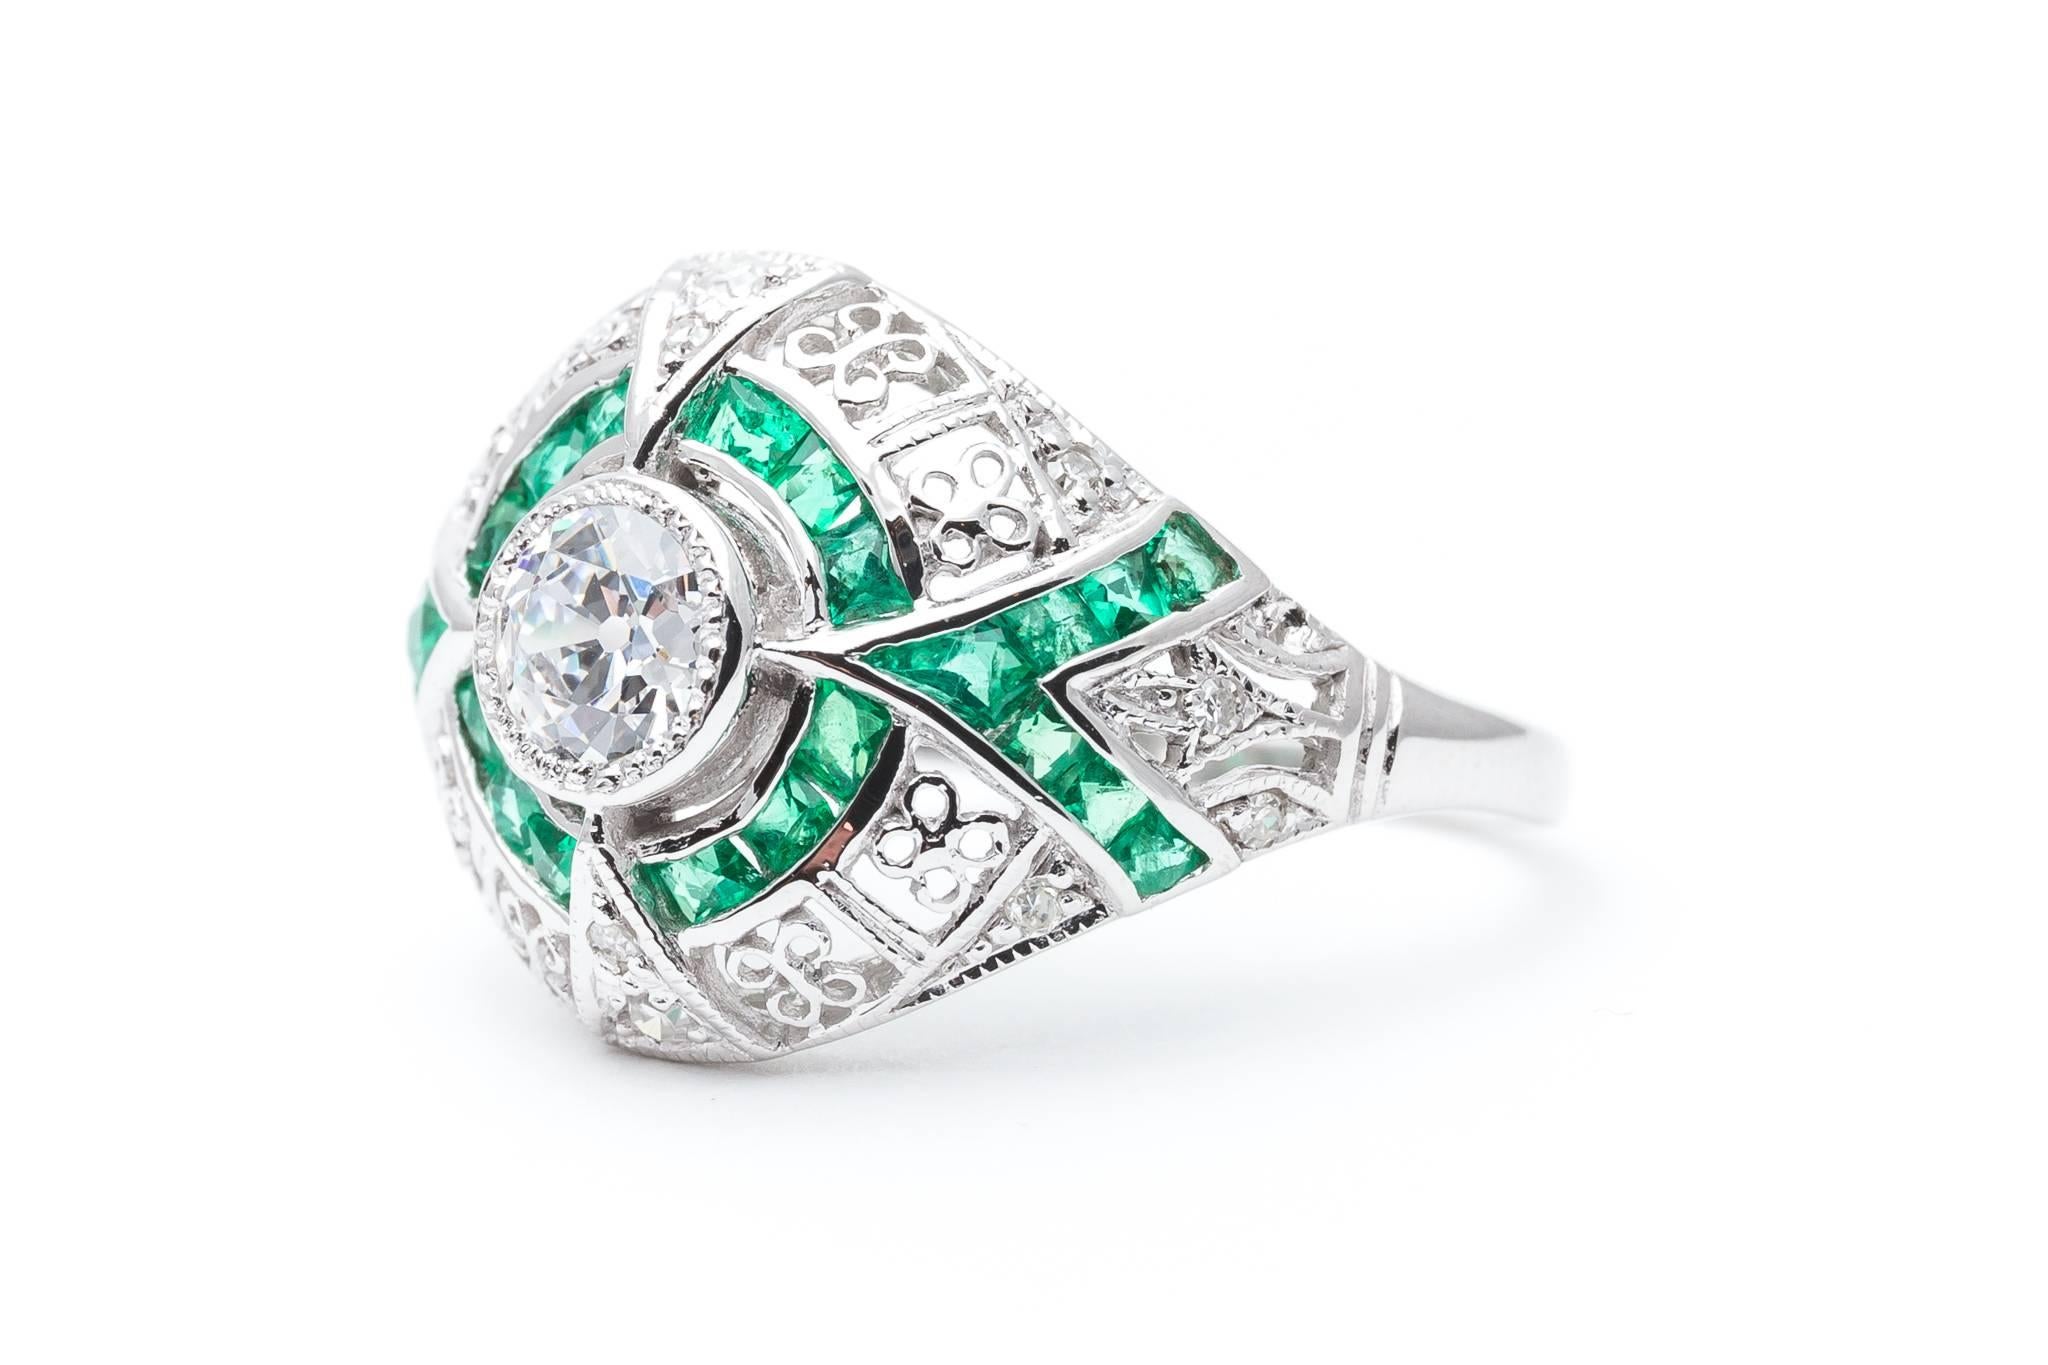 Ravishing 0.60 Carat Diamond Emerald White Gold Ring In Excellent Condition For Sale In Boston, MA